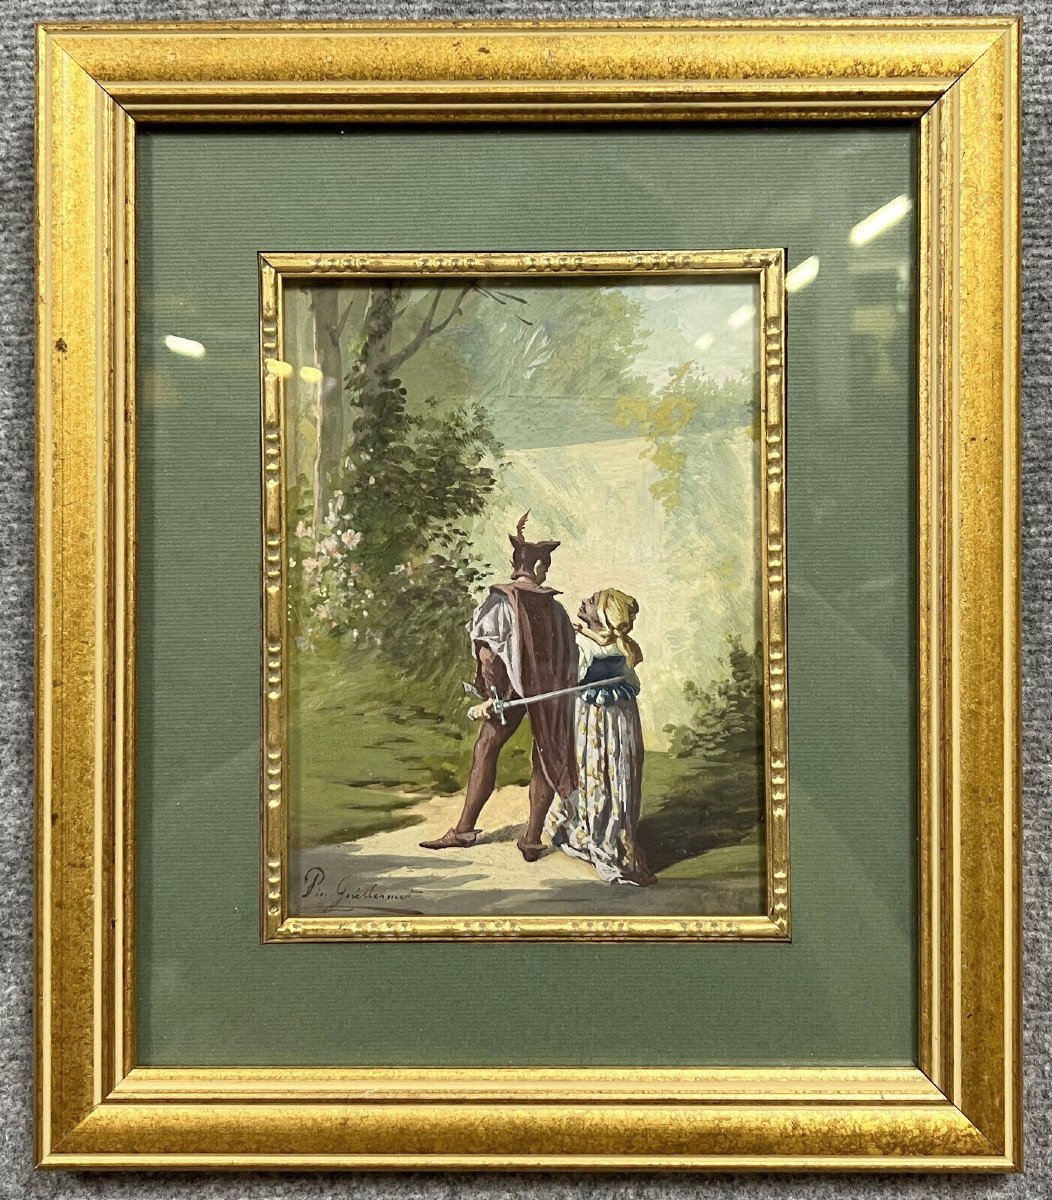 Pierre Guillermet: 19th Century Watercolor Depicting An Animated Undergrowth Scene